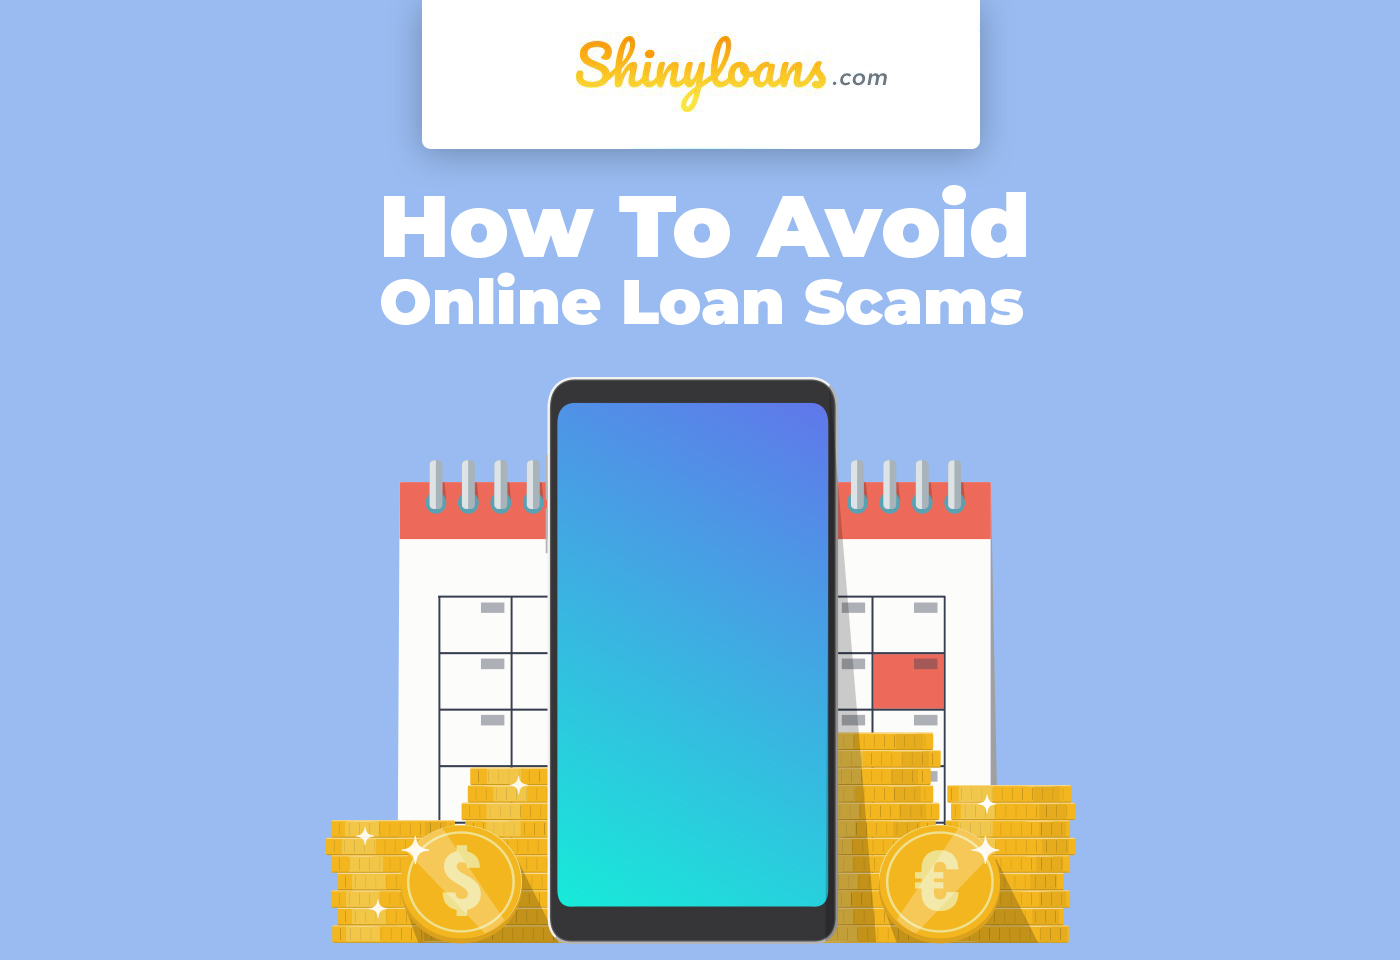 How To Avoid Online Loan Scams